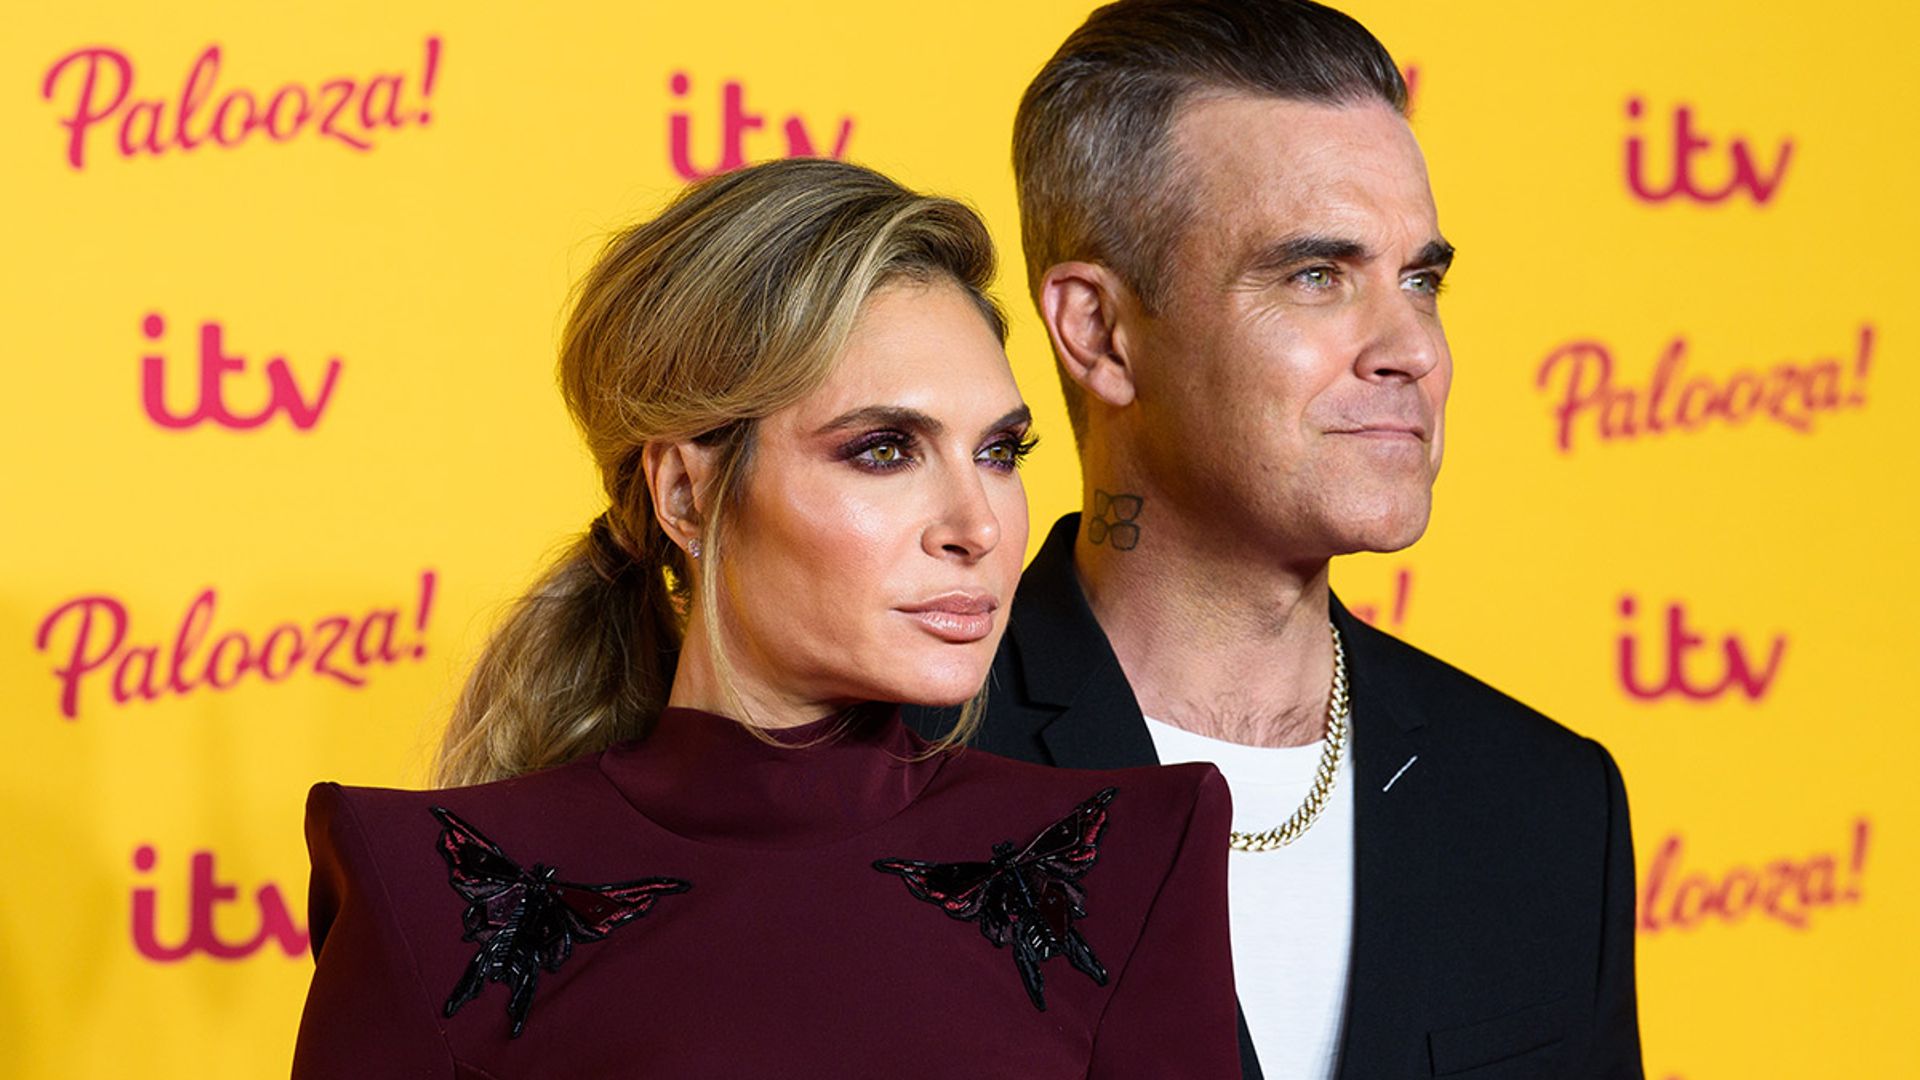 Robbie Williams is floored by wife Ayda Field's incredible flexibility